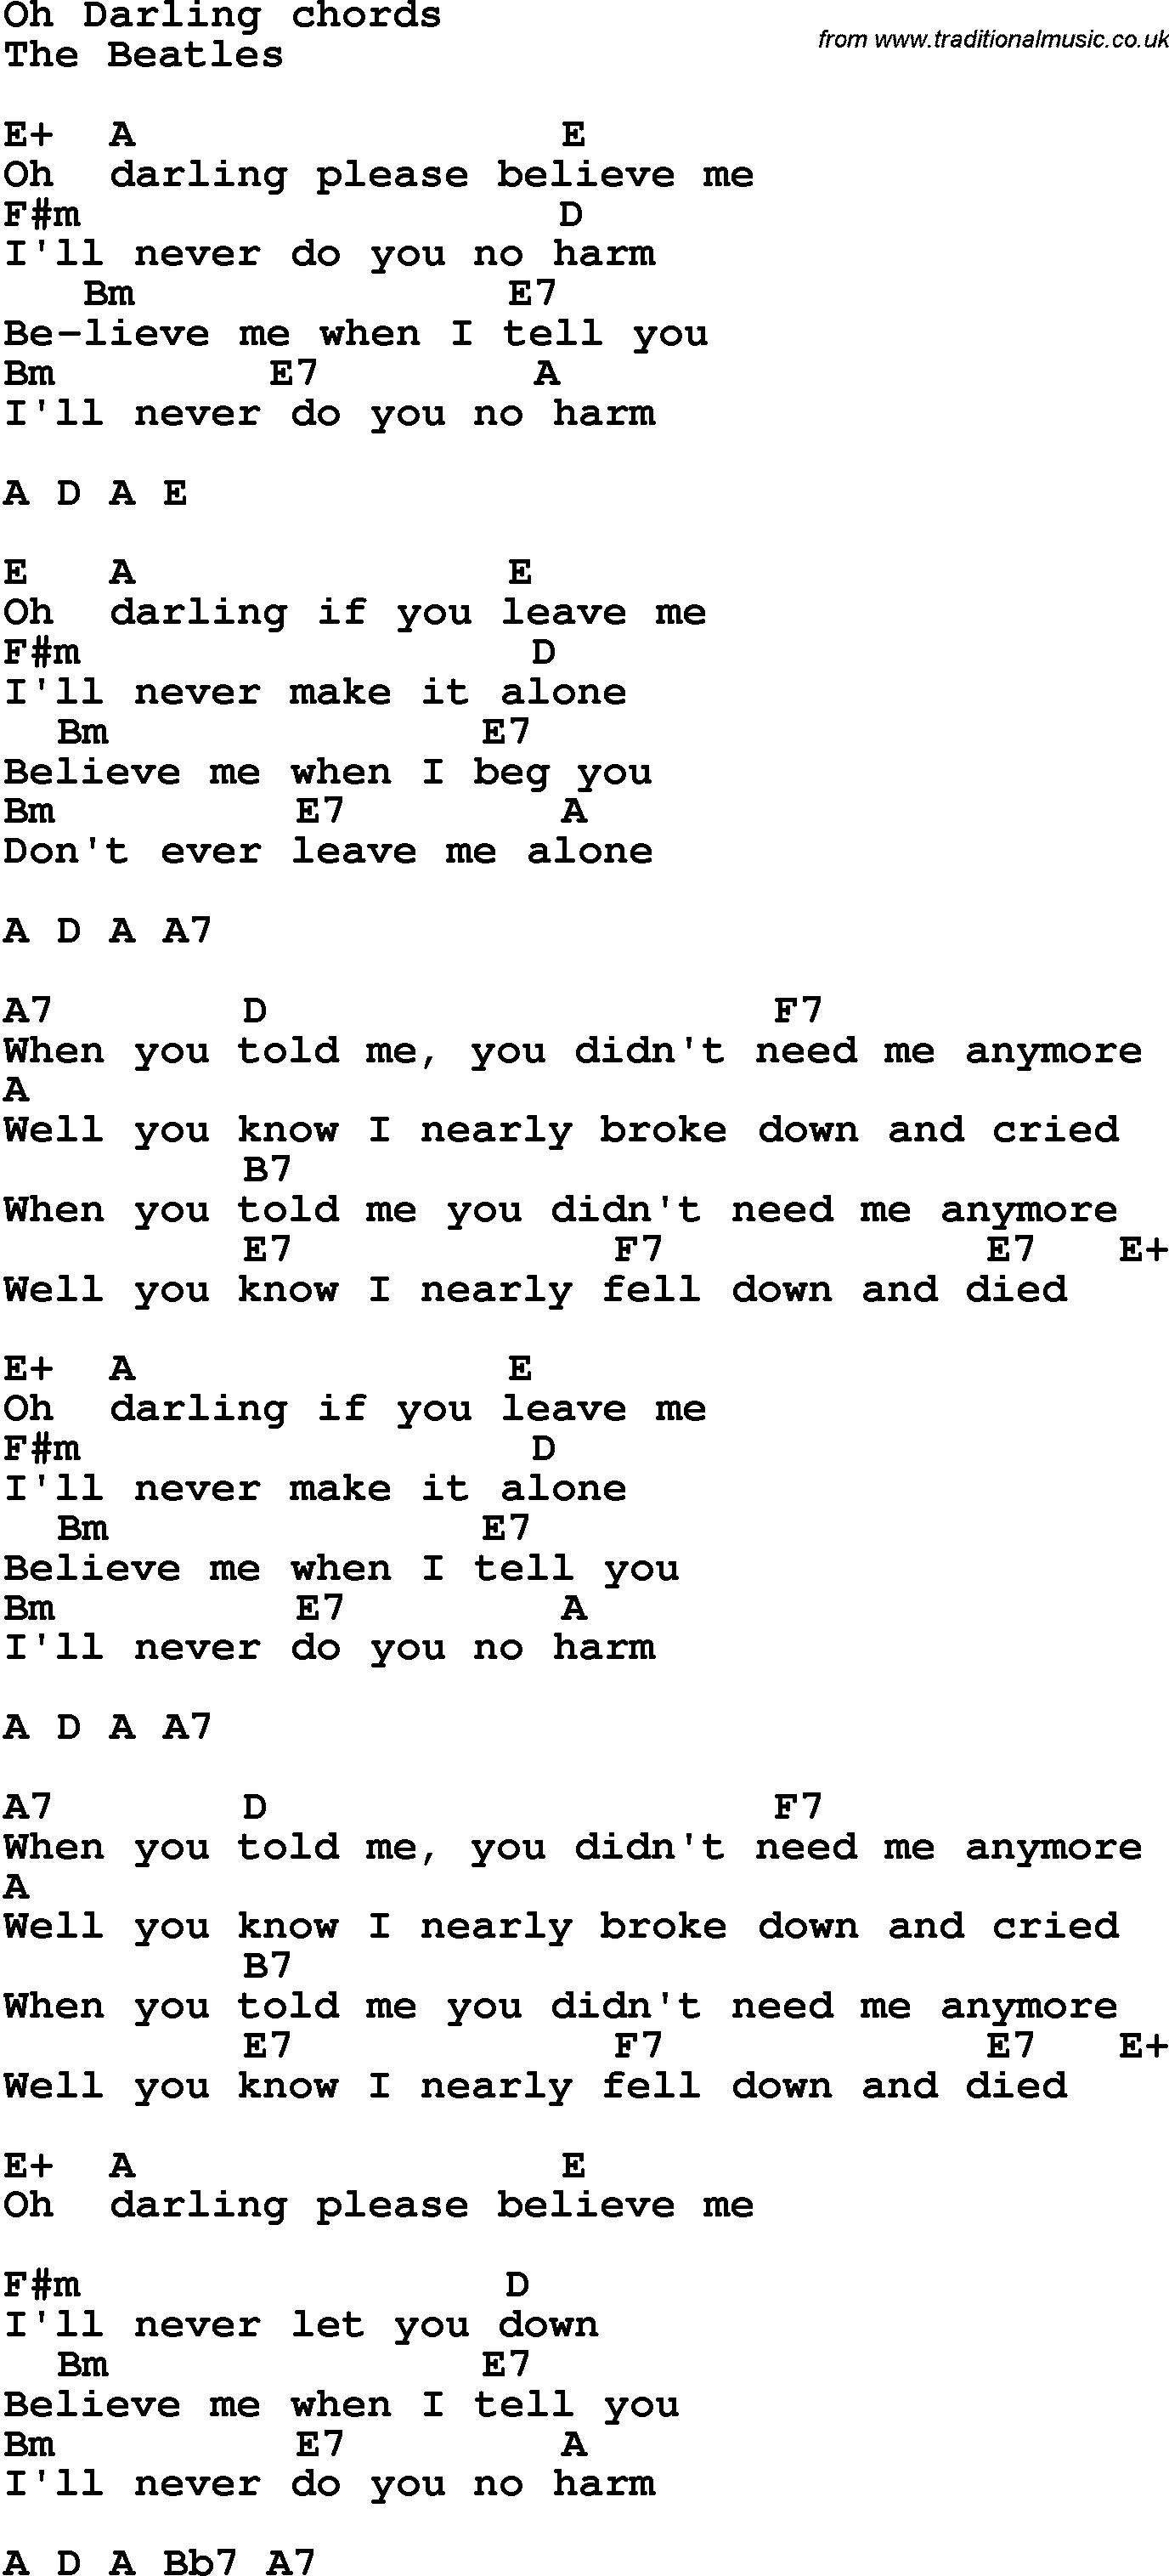 Song Lyrics with guitar chords for Oh Darling - The Beatles